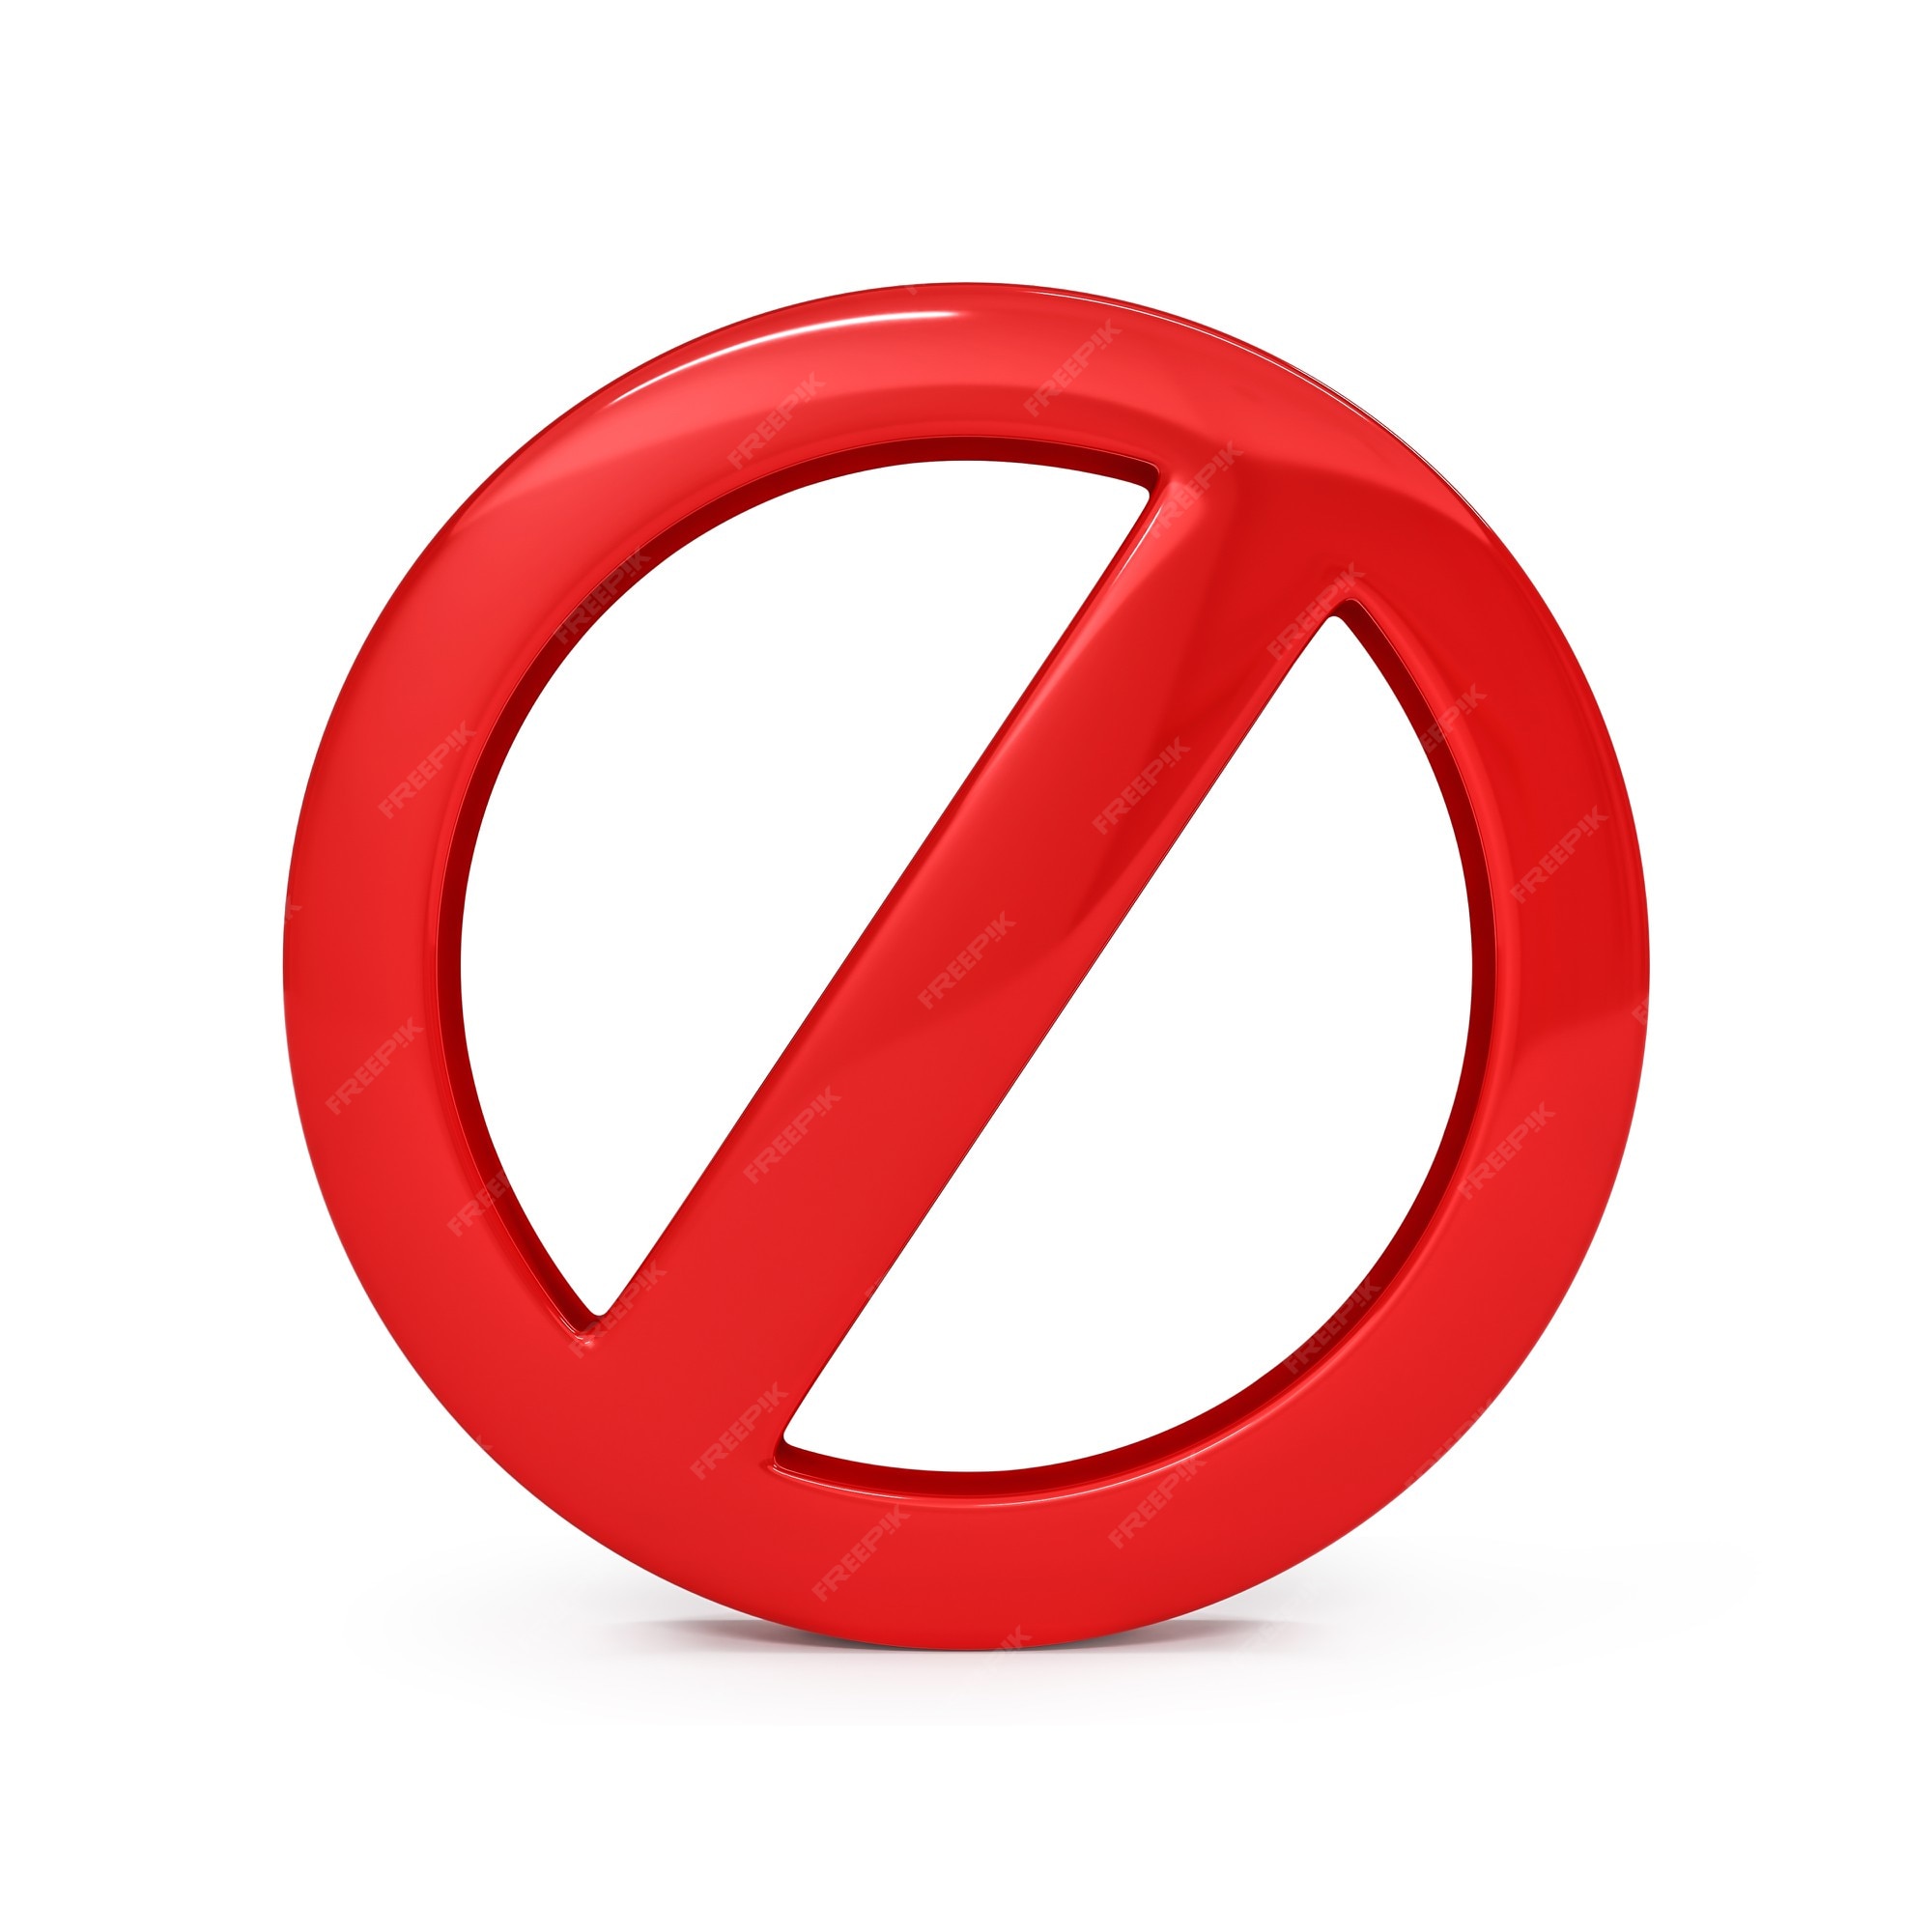 Free Vector  Red forbidden sign with hand do not touch safety risk danger  security attention vector illustration